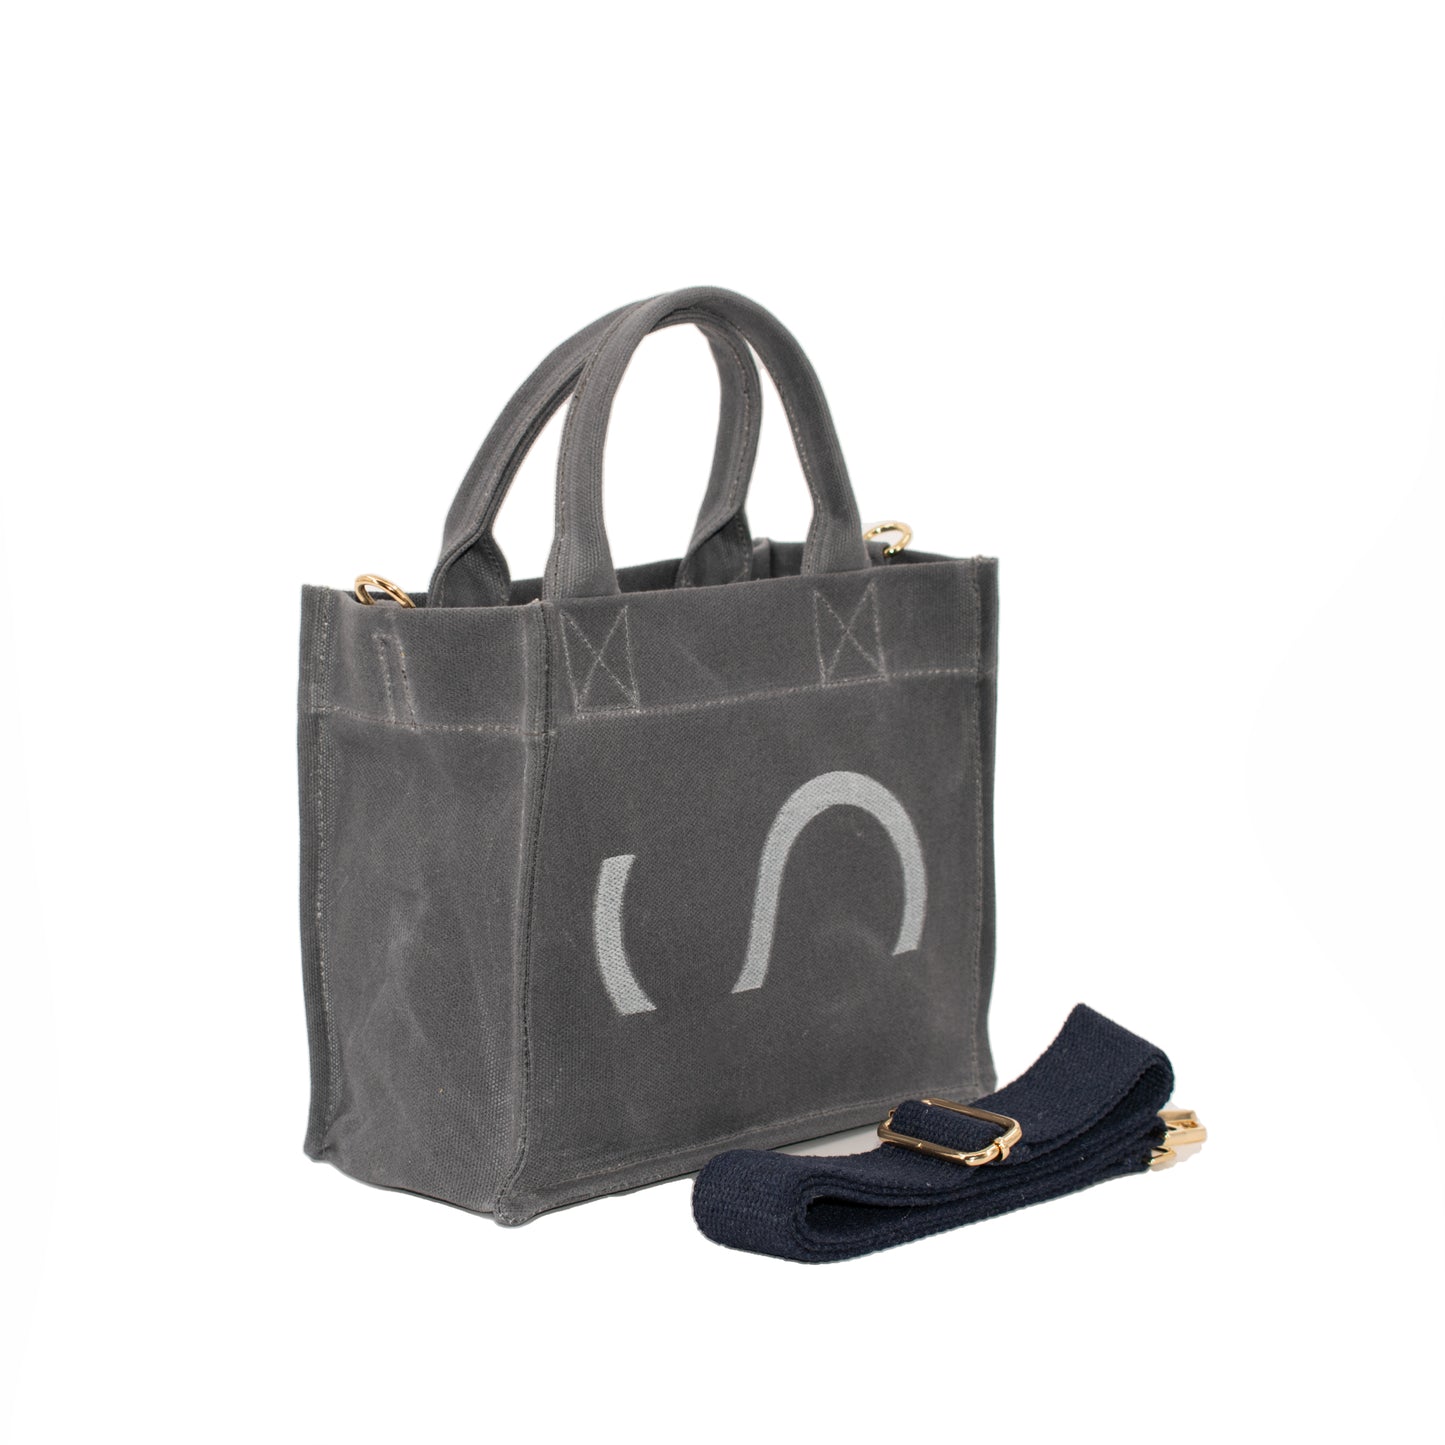 HCANSS WAXED CANVAS GREY MINI TOTE BAG